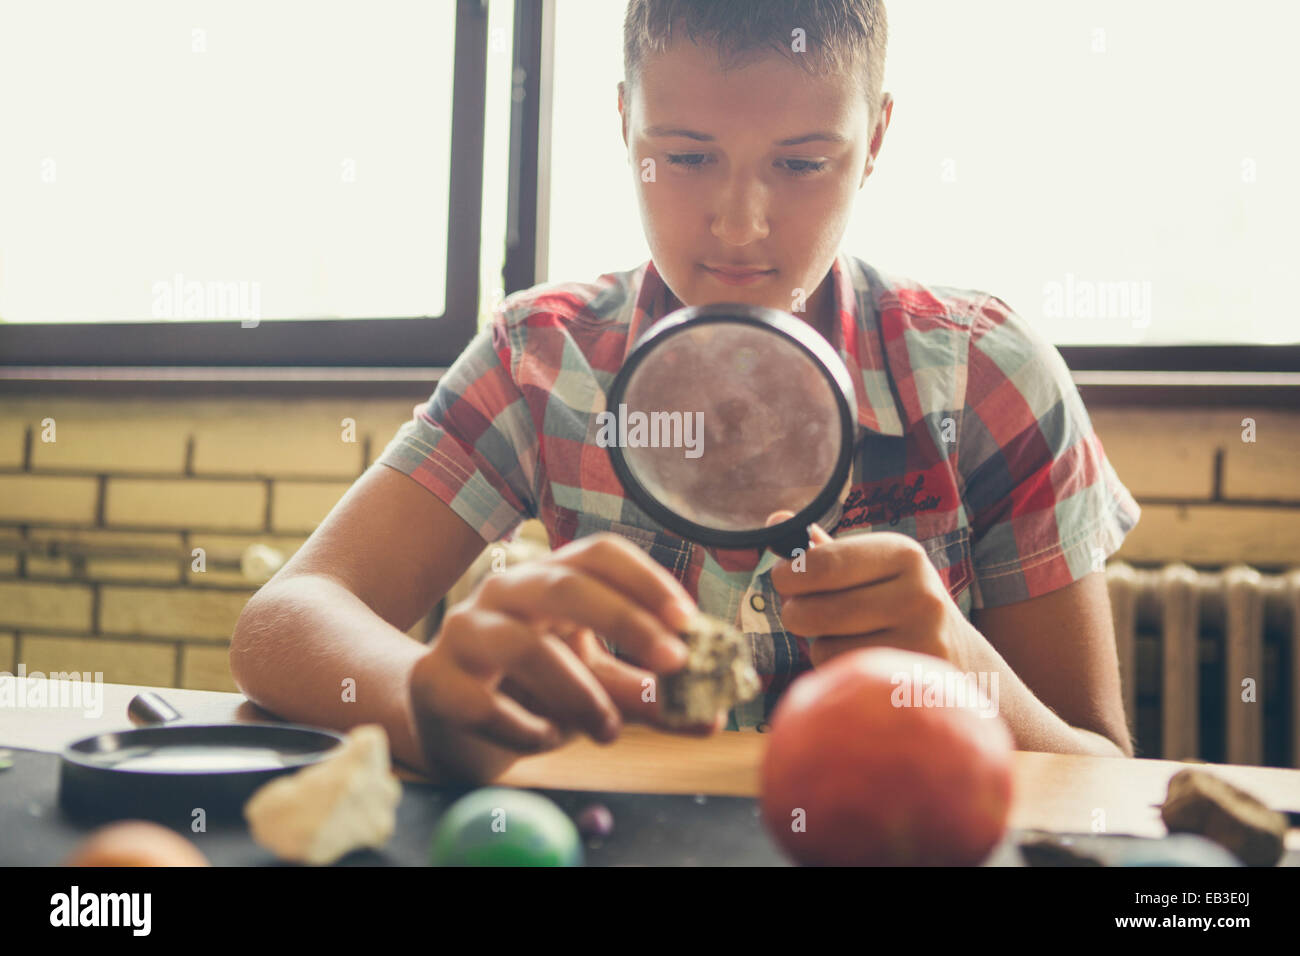 Student examining models of planets in classroom Stock Photo